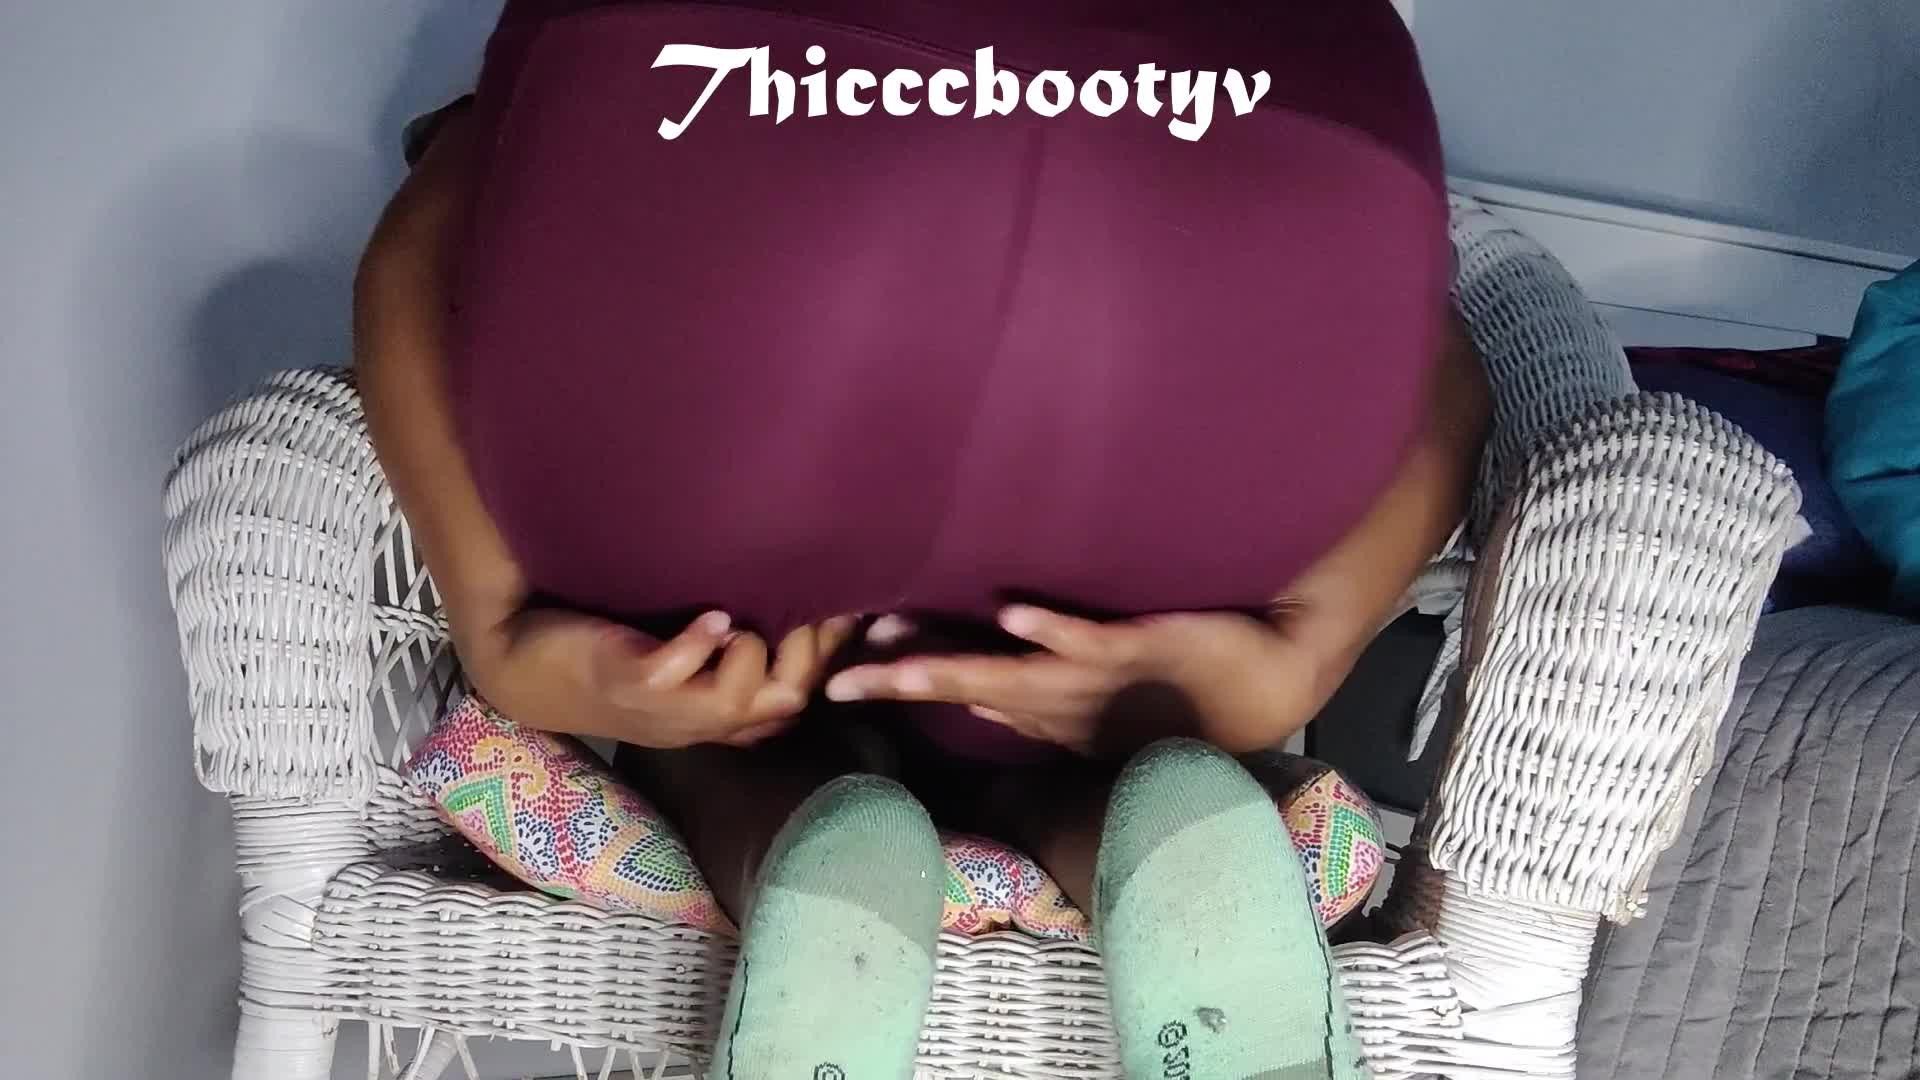 Video post by thicccbootyv